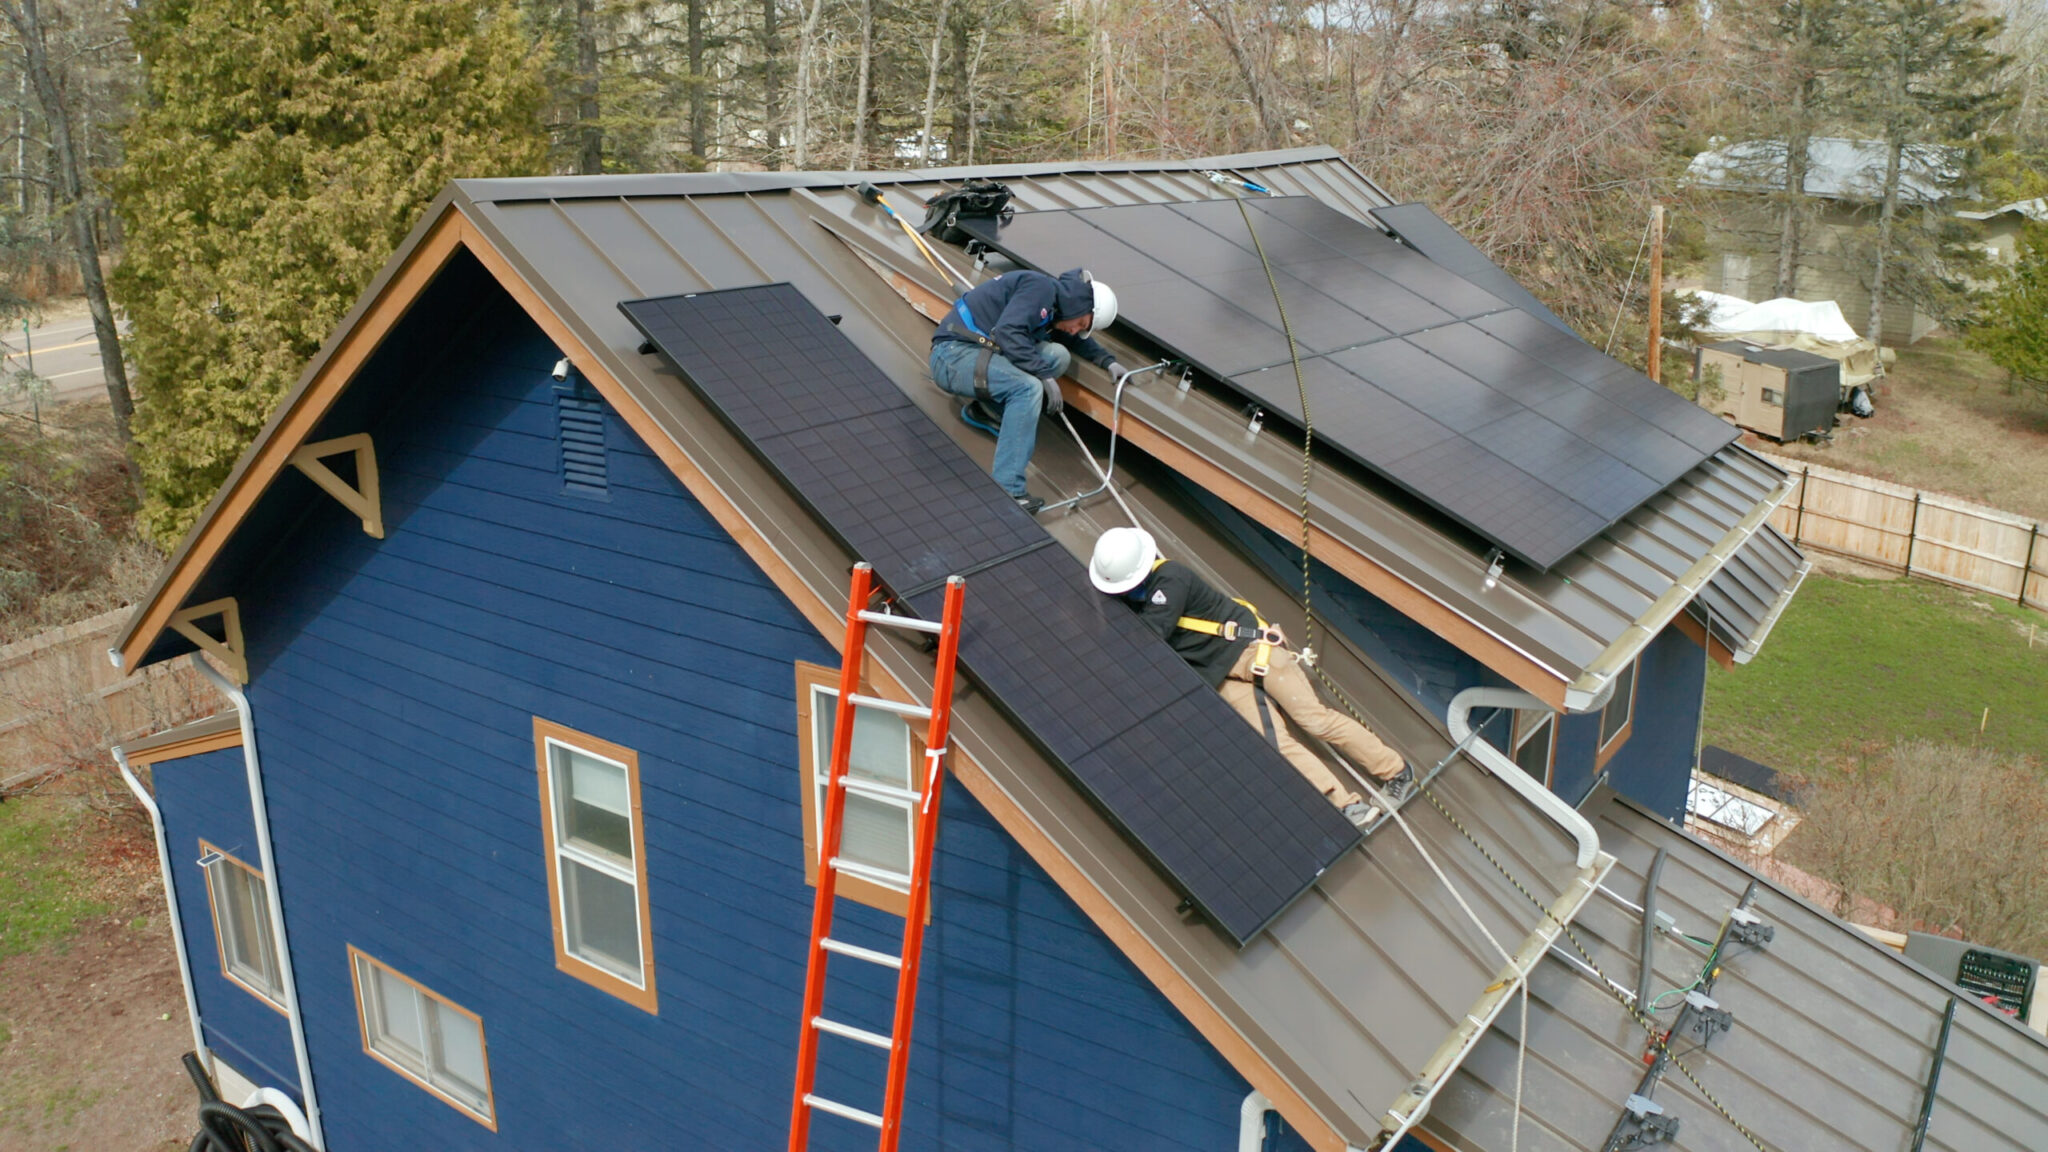 Two men installing solar panels on a blue house